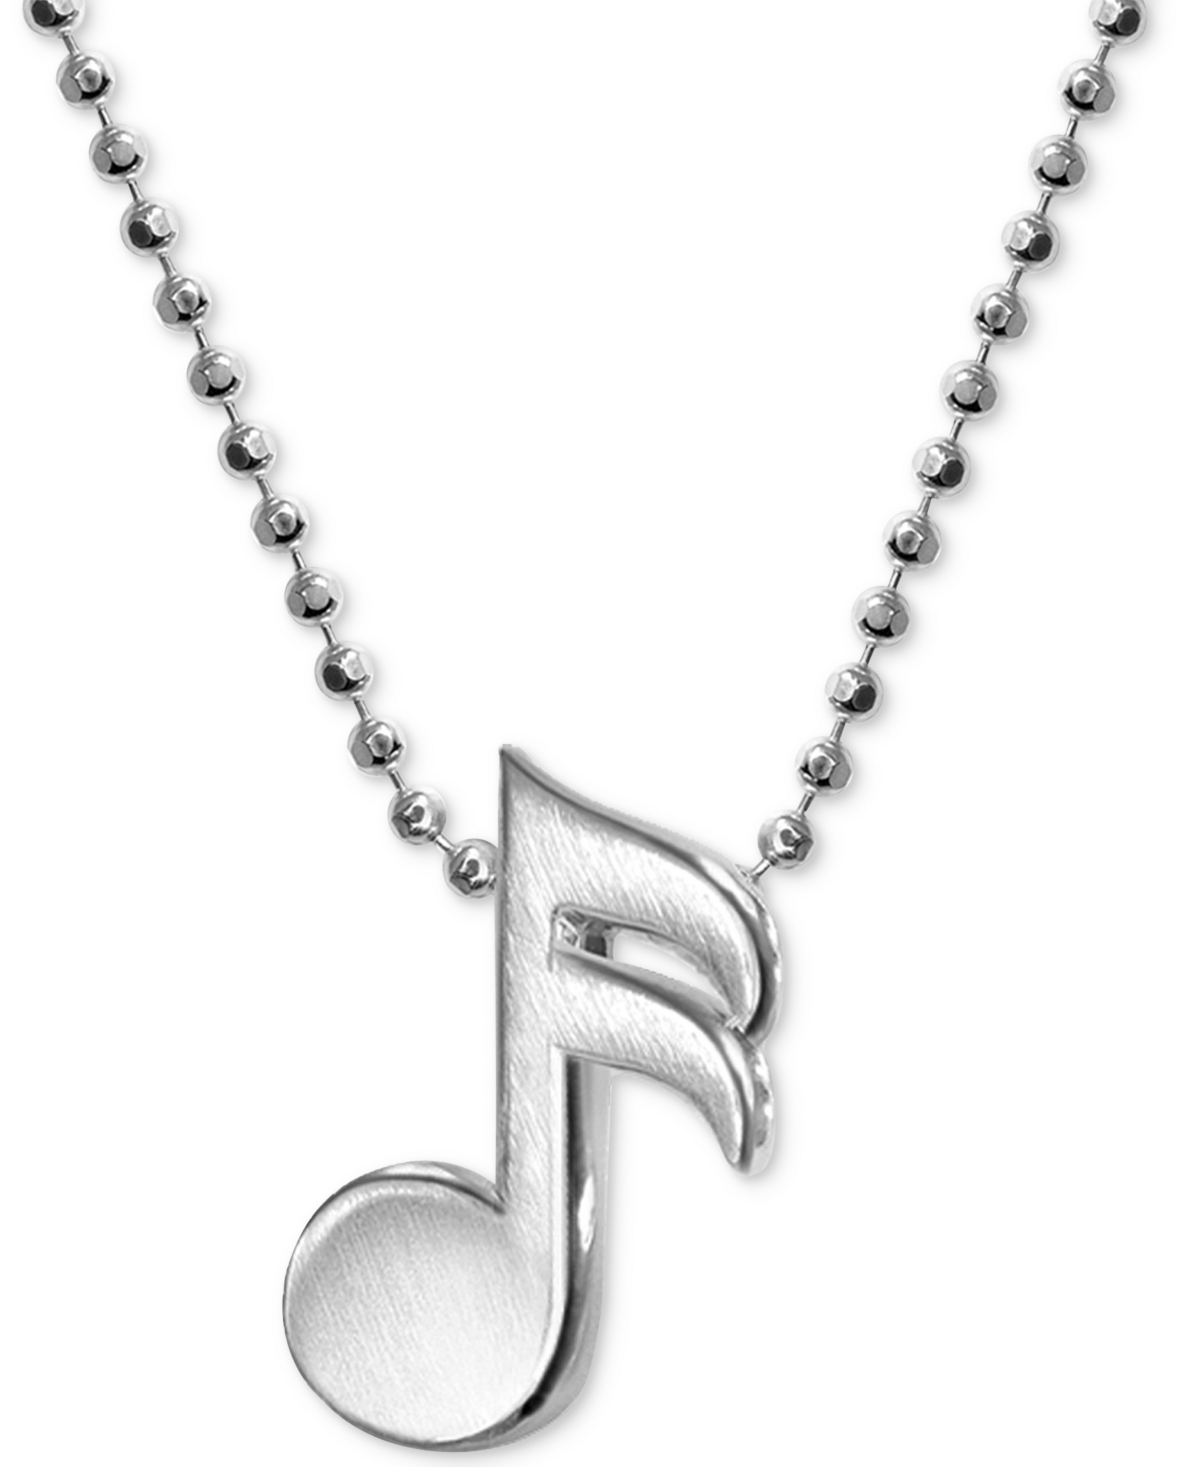 Music Note Necklace in Sterling Silver - Silver